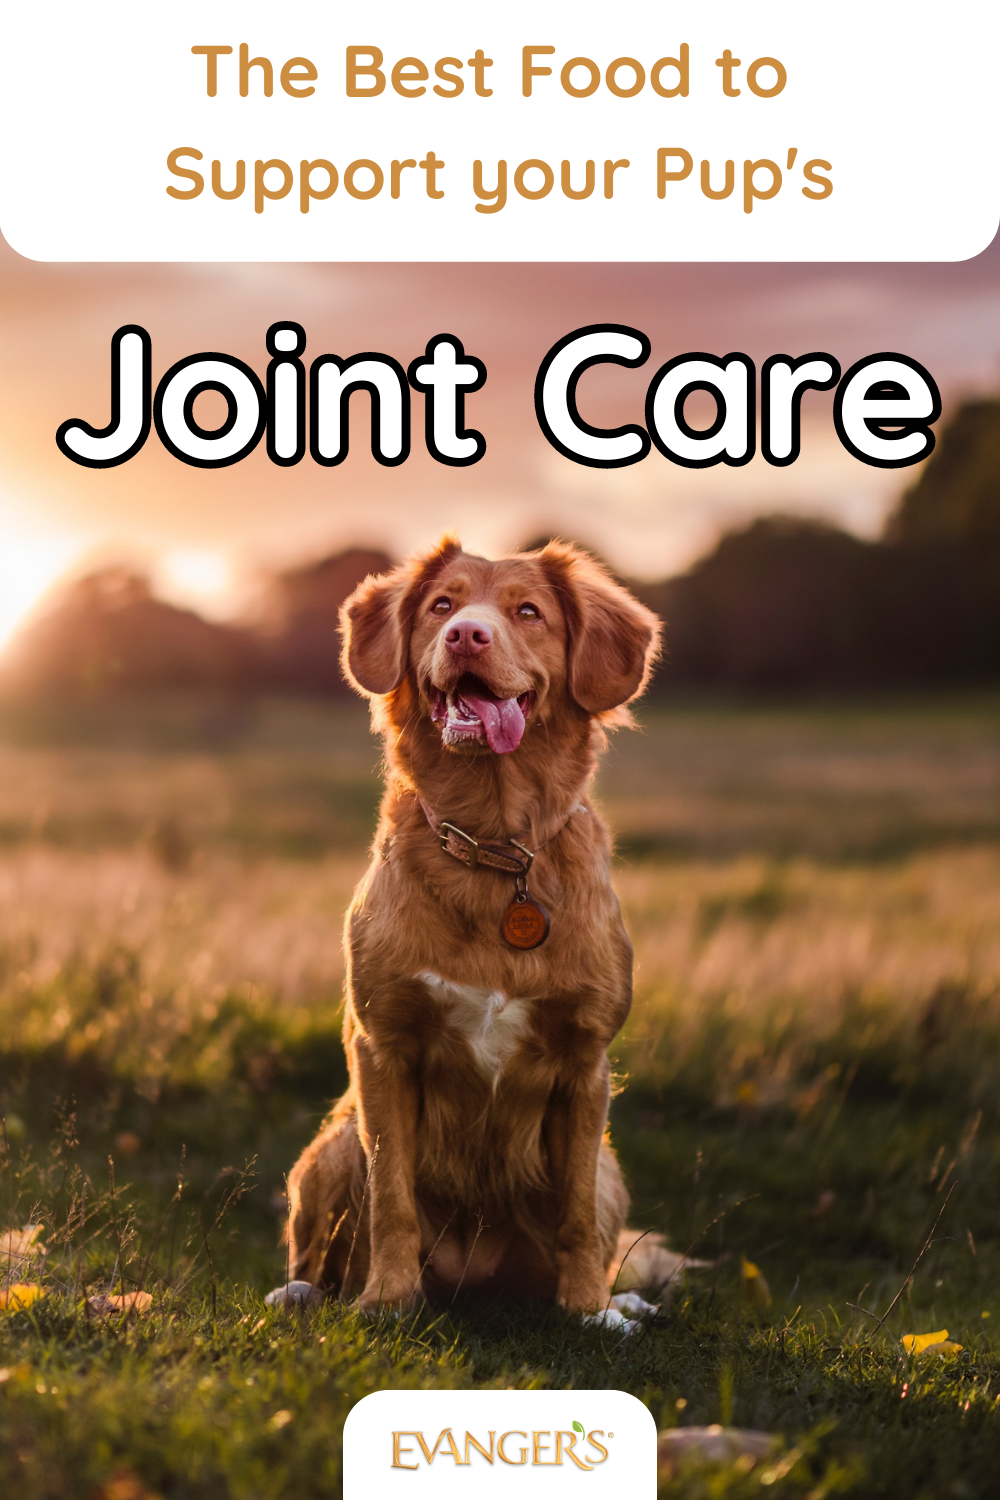 The Best Food to Support your Pup's Joint Care